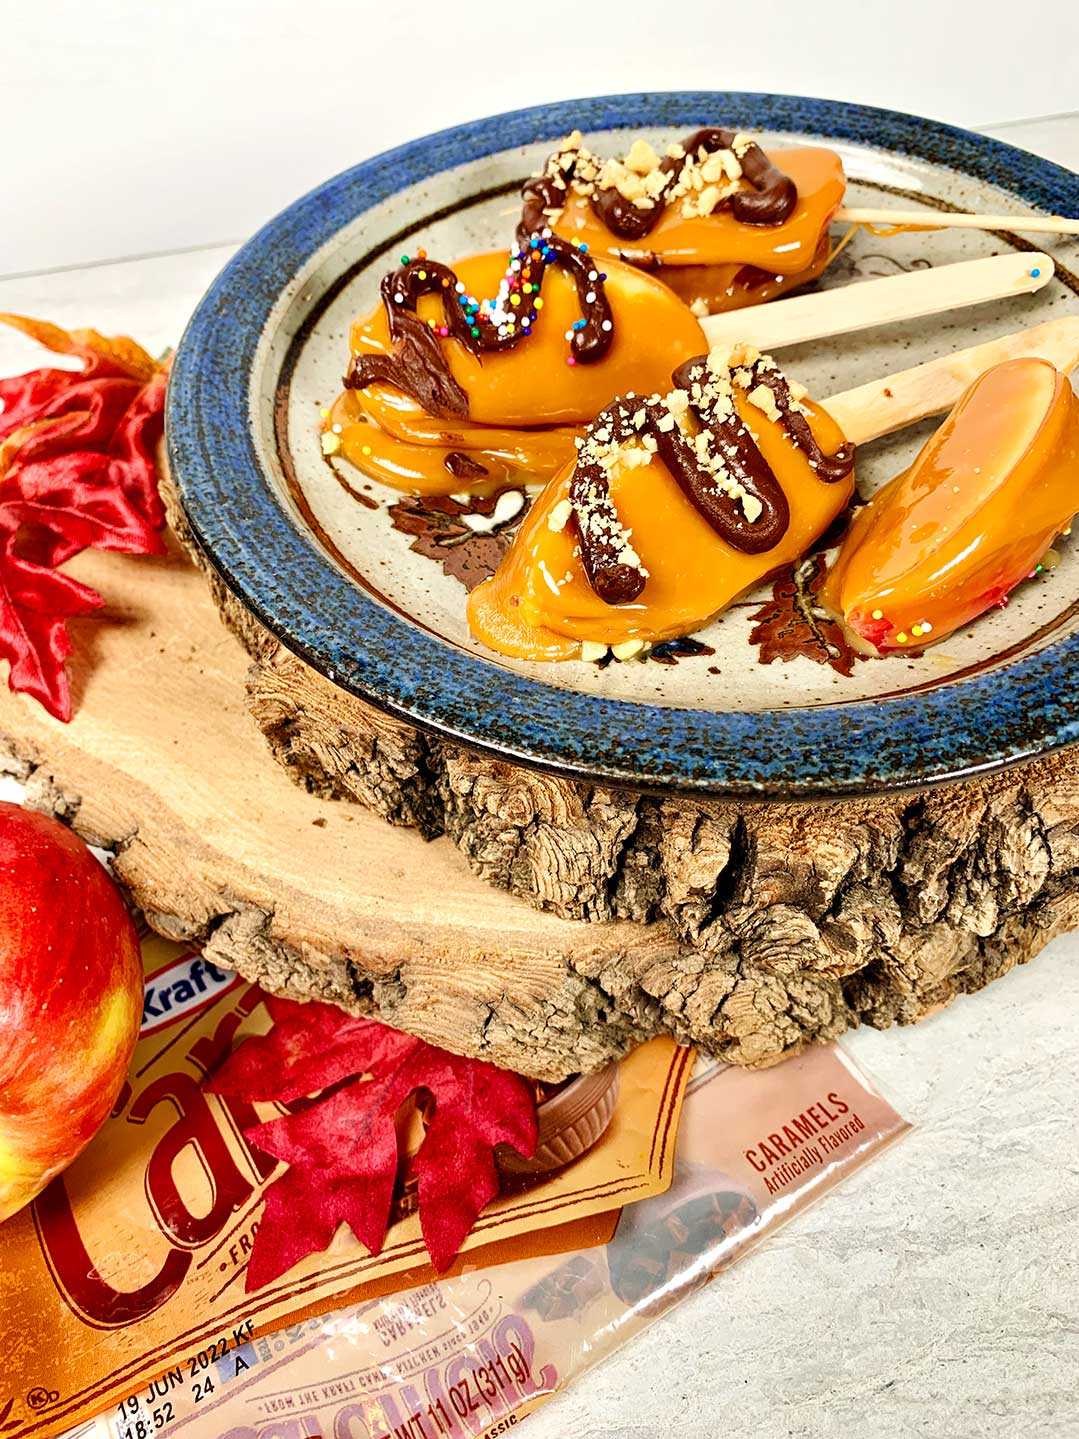 Plate of decorated caramel apple slices on a stick on wood slices with leaves and apples nearby.